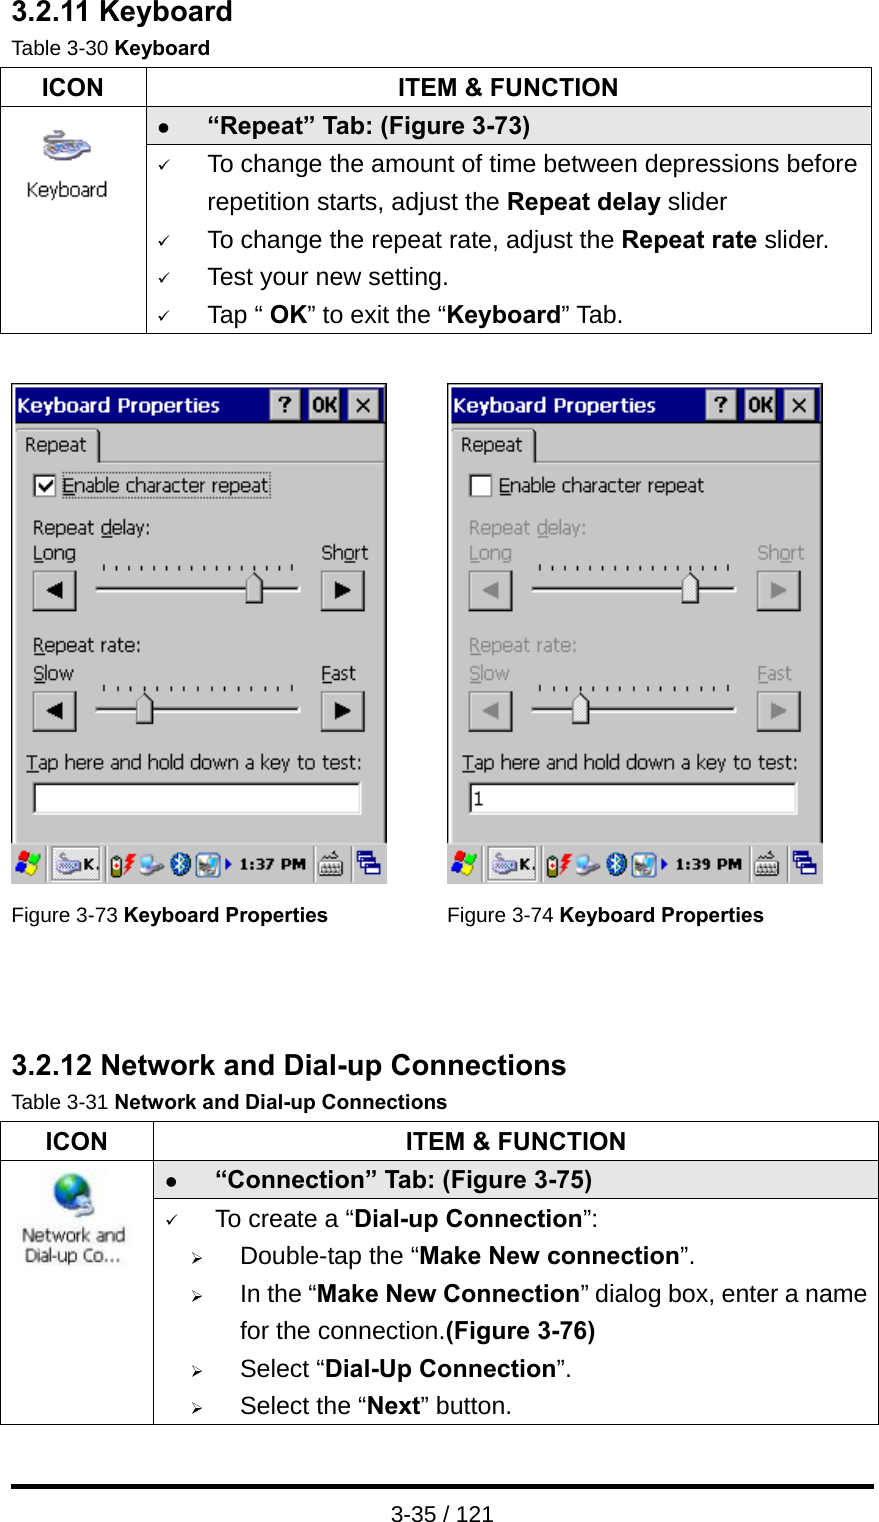  3-35 / 121 3.2.11 Keyboard Table 3-30 Keyboard ICON  ITEM &amp; FUNCTION z “Repeat” Tab: (Figure 3-73)    9 To change the amount of time between depressions before repetition starts, adjust the Repeat delay slider 9 To change the repeat rate, adjust the Repeat rate slider. 9 Test your new setting. 9 Tap “ OK” to exit the “Keyboard” Tab.     Figure 3-73 Keyboard Properties  Figure 3-74 Keyboard Properties   3.2.12 Network and Dial-up Connections Table 3-31 Network and Dial-up Connections ICON  ITEM &amp; FUNCTION z “Connection” Tab: (Figure 3-75)      9 To create a “Dial-up Connection”: ¾ Double-tap the “Make New connection”. ¾ In the “Make New Connection” dialog box, enter a name for the connection.(Figure 3-76) ¾ Select “Dial-Up Connection”. ¾ Select the “Next” button. 